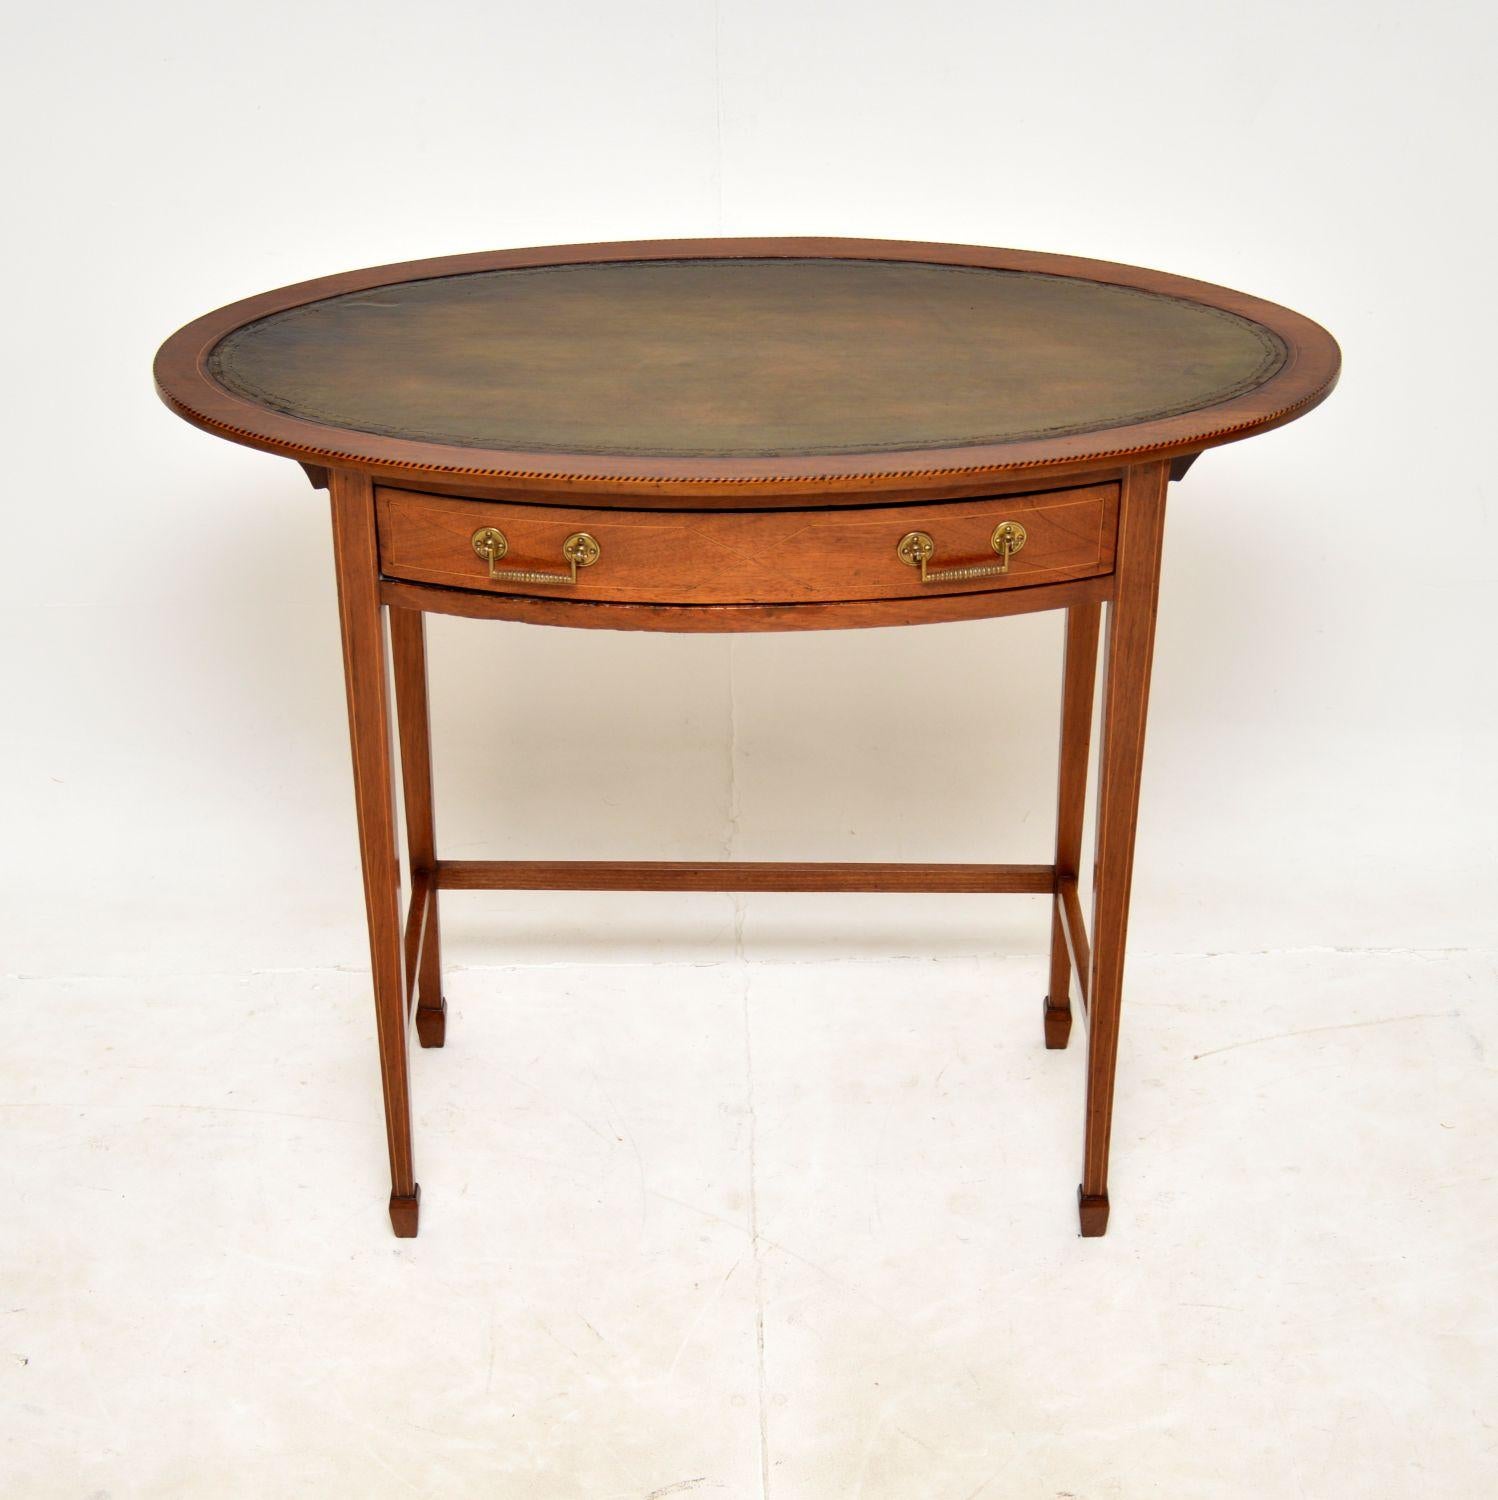 A beautiful and quite unusual antique Edwardian leather top writing table. This was made in England, it dates from around 1890-1900.

This is very well made and is a useful size, the oval top has an inset tooled green leather writing surface. There